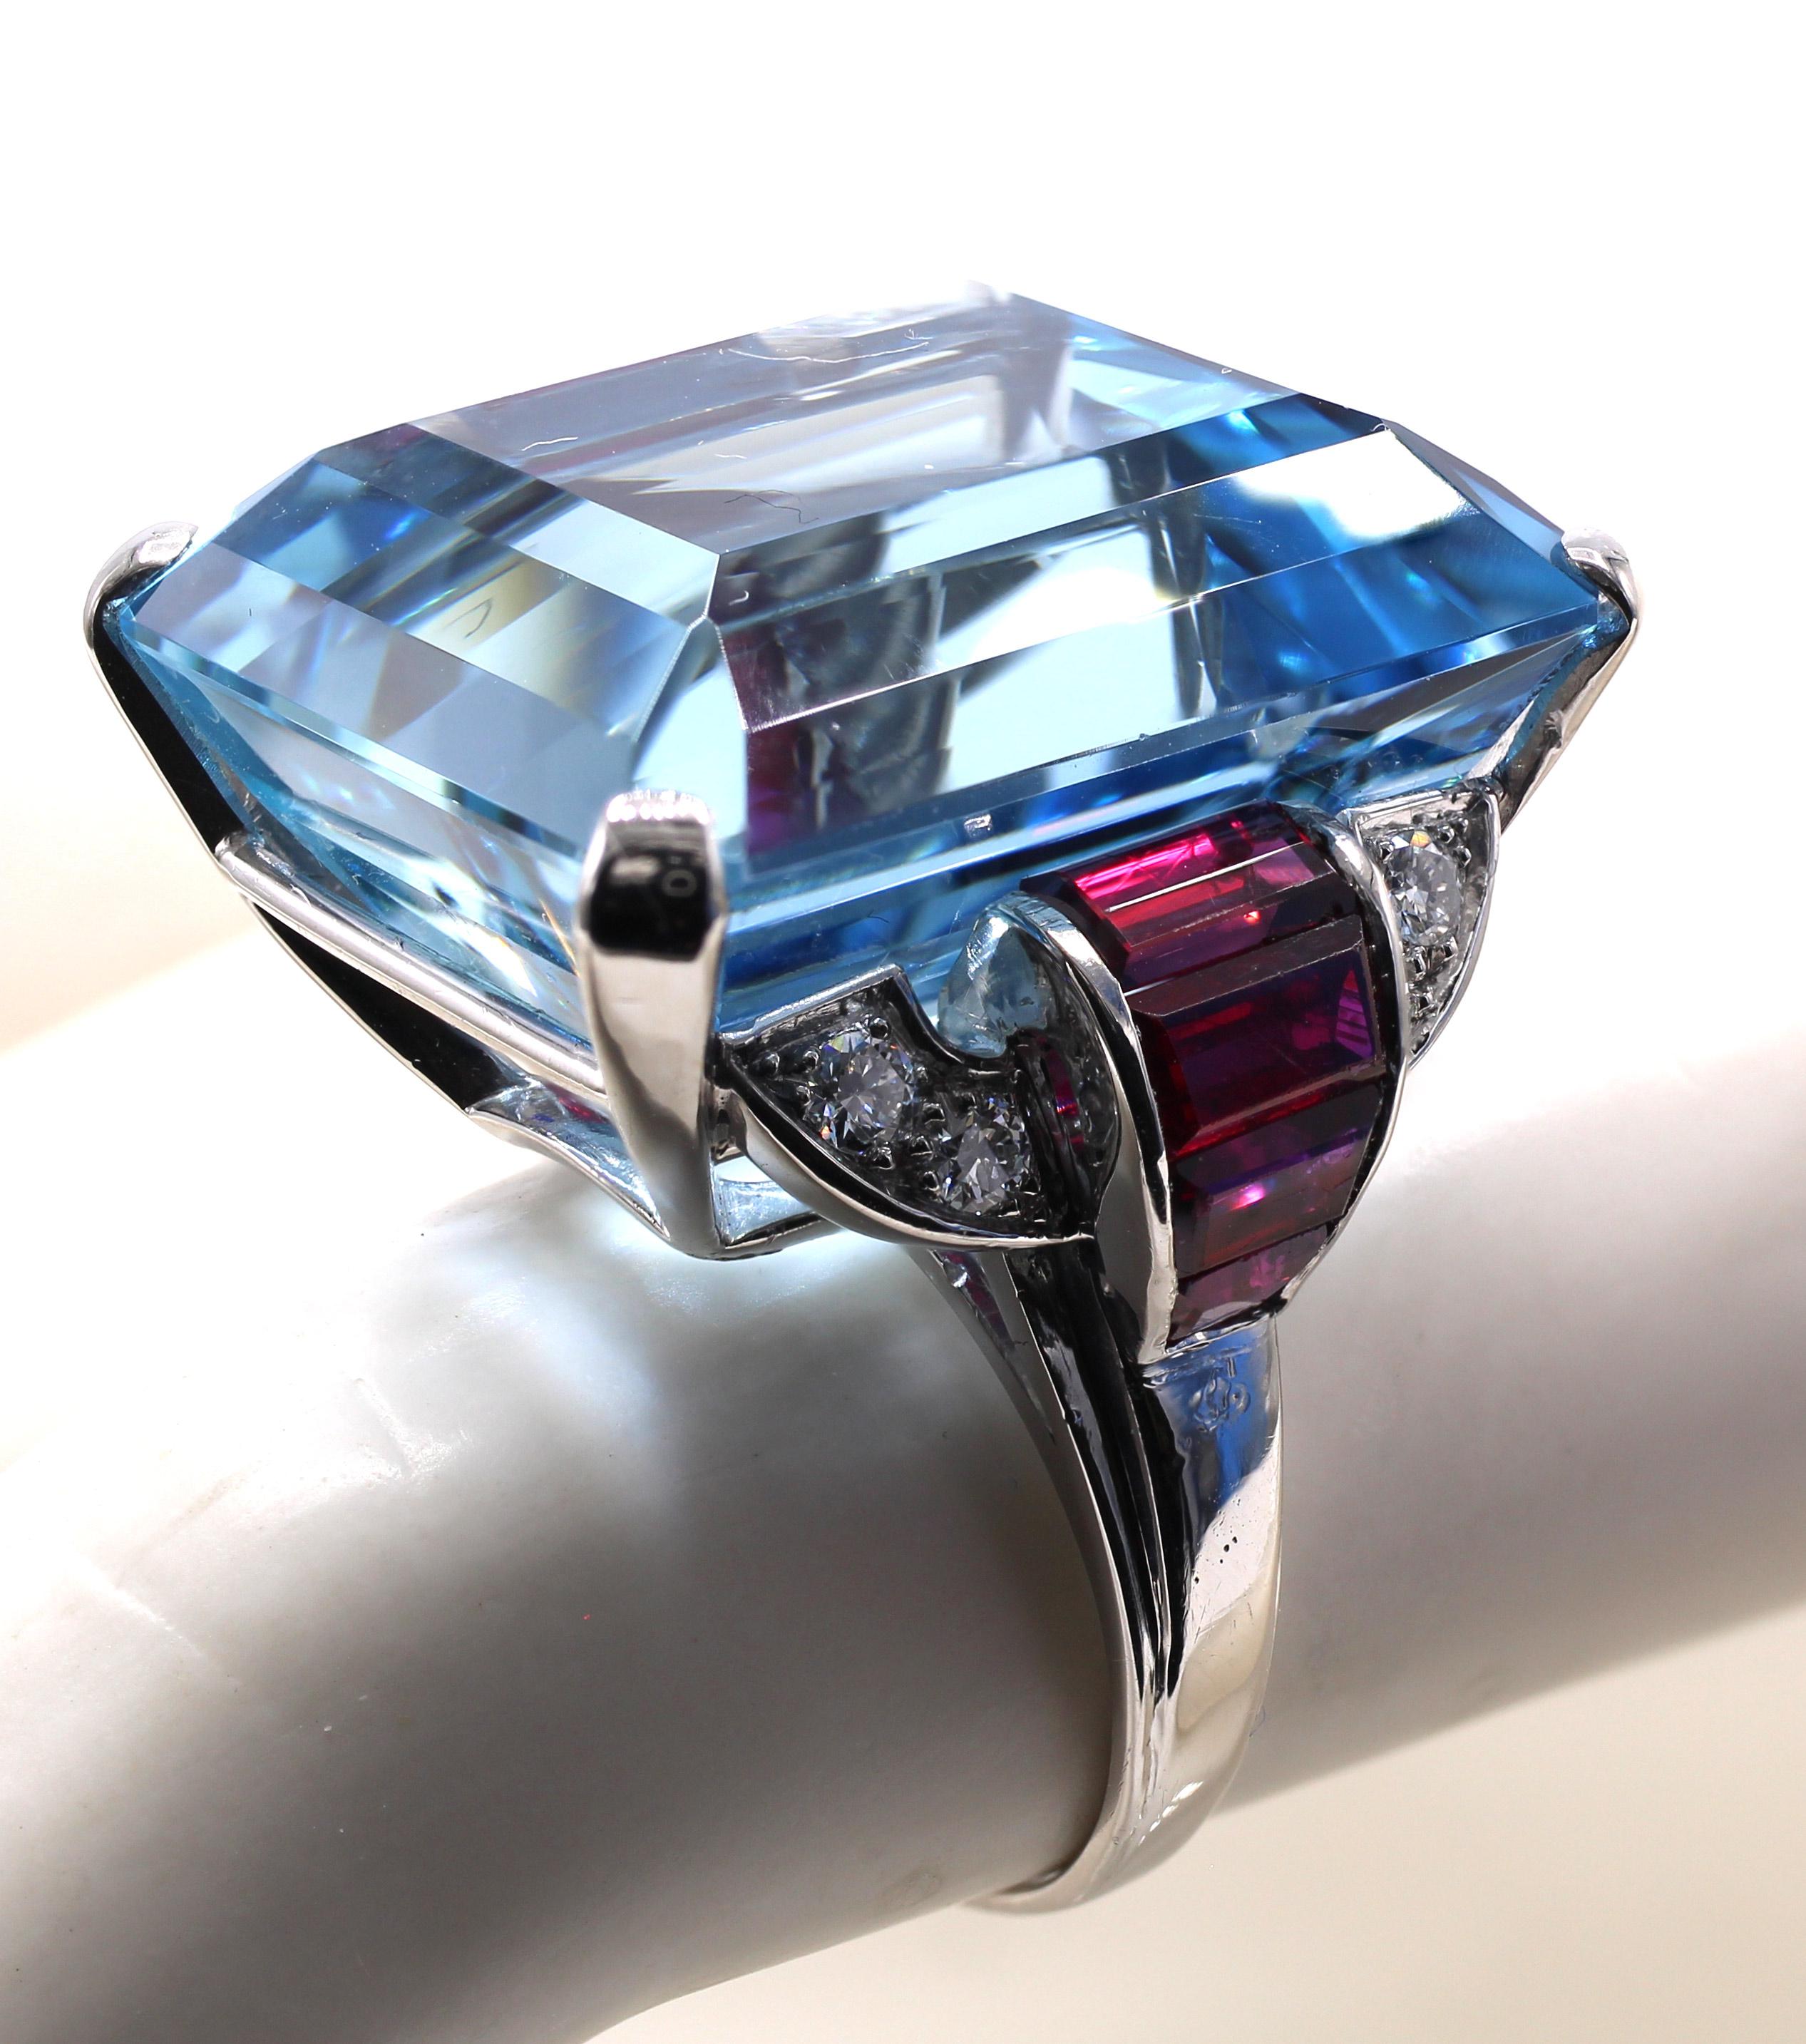 The center piece of this gorgeous Art Deco ring from ca 1935 is a Santa Maria color perfectly cut aquamarine weighing 44.28 carats. The rectangular step cut aquamarine has an amazing color saturation and is crystal clear with wonderful brilliance